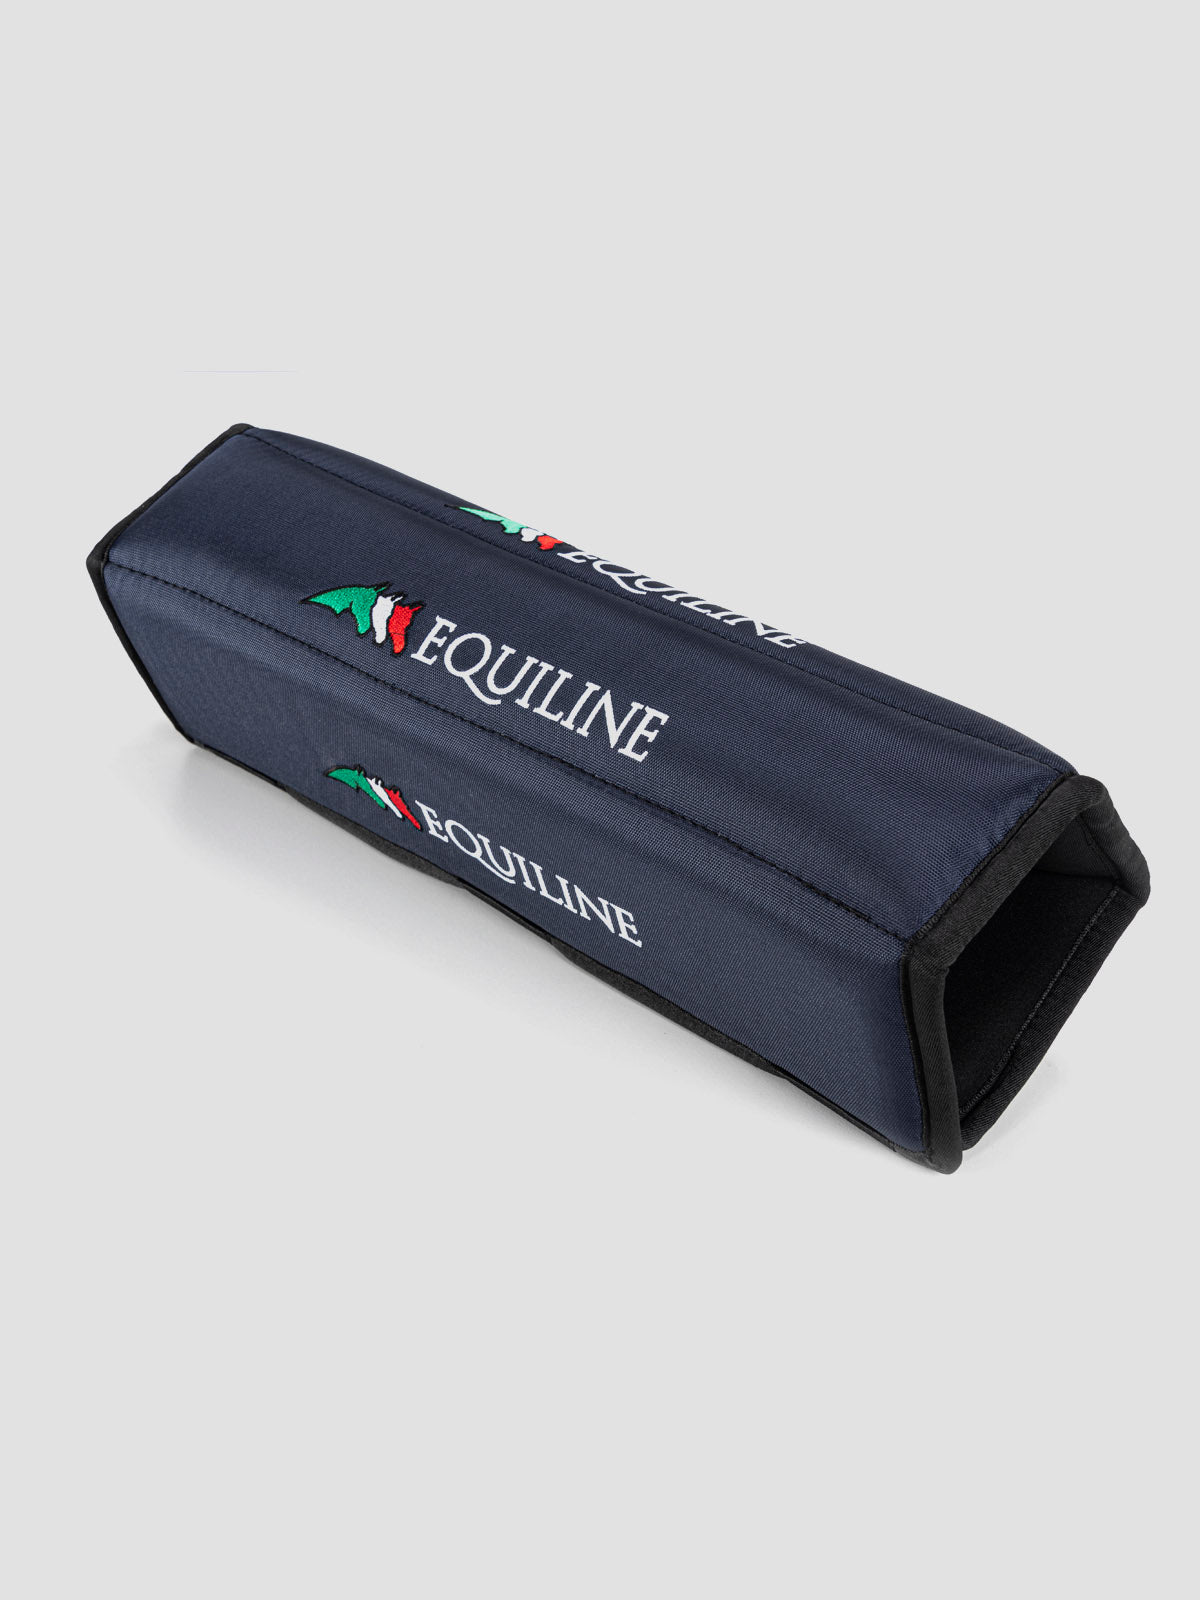 Protect your horse in their stable either at home and away with the Equiline padded head protector.